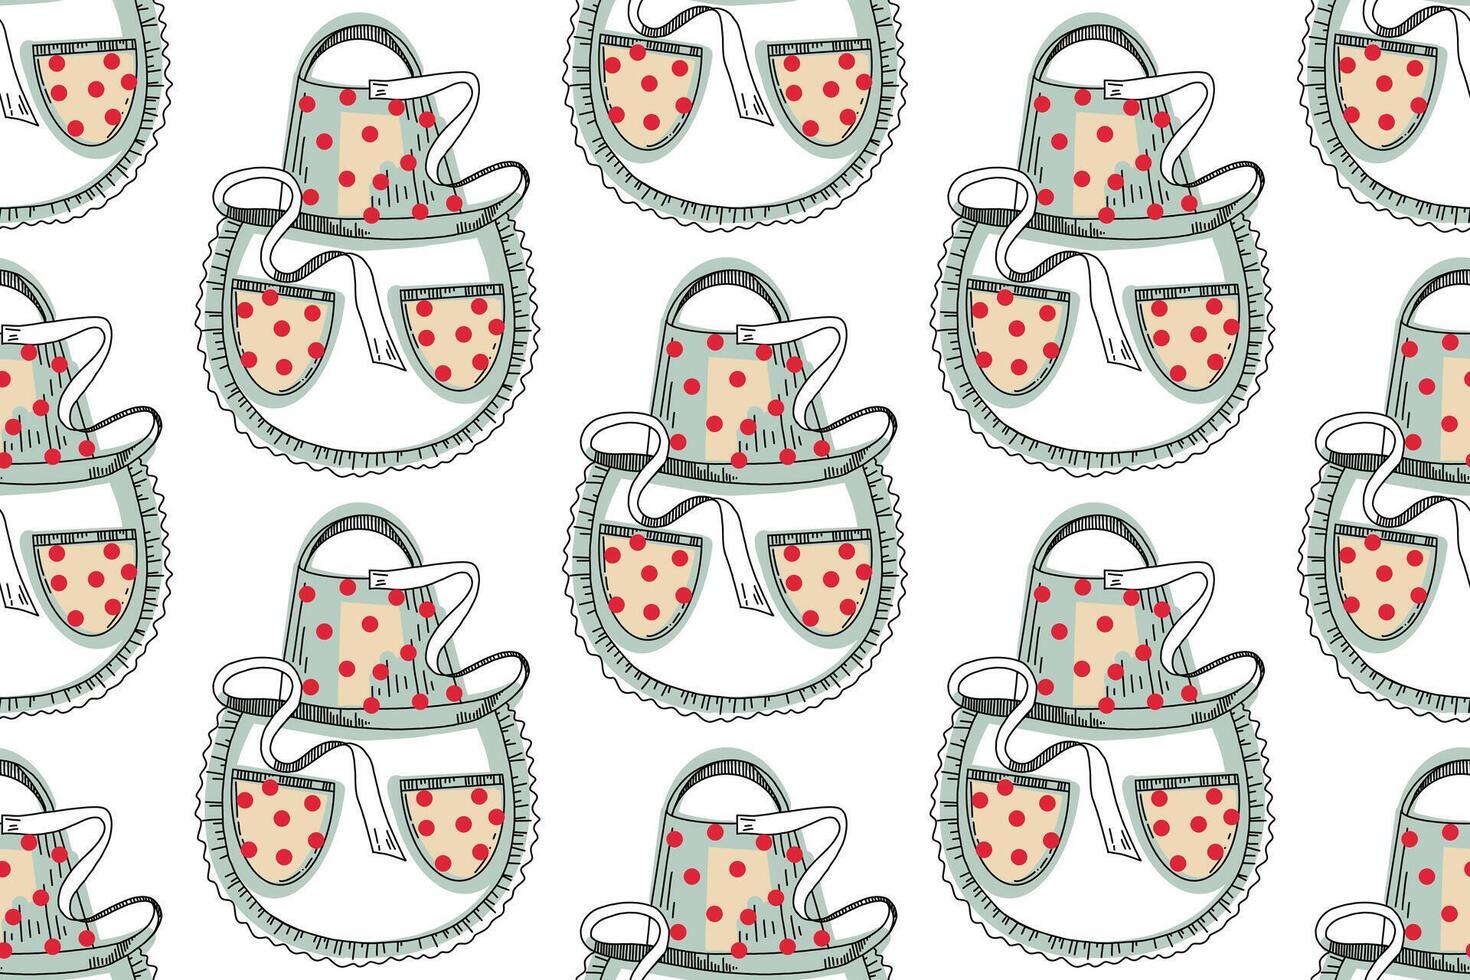 Seamless pattern with kitchen utensils. Cooking apron with lace and red polka dot pockets. All objects are hand-drawn in in blue, red and black. For fabric, paper, kitchen design vector